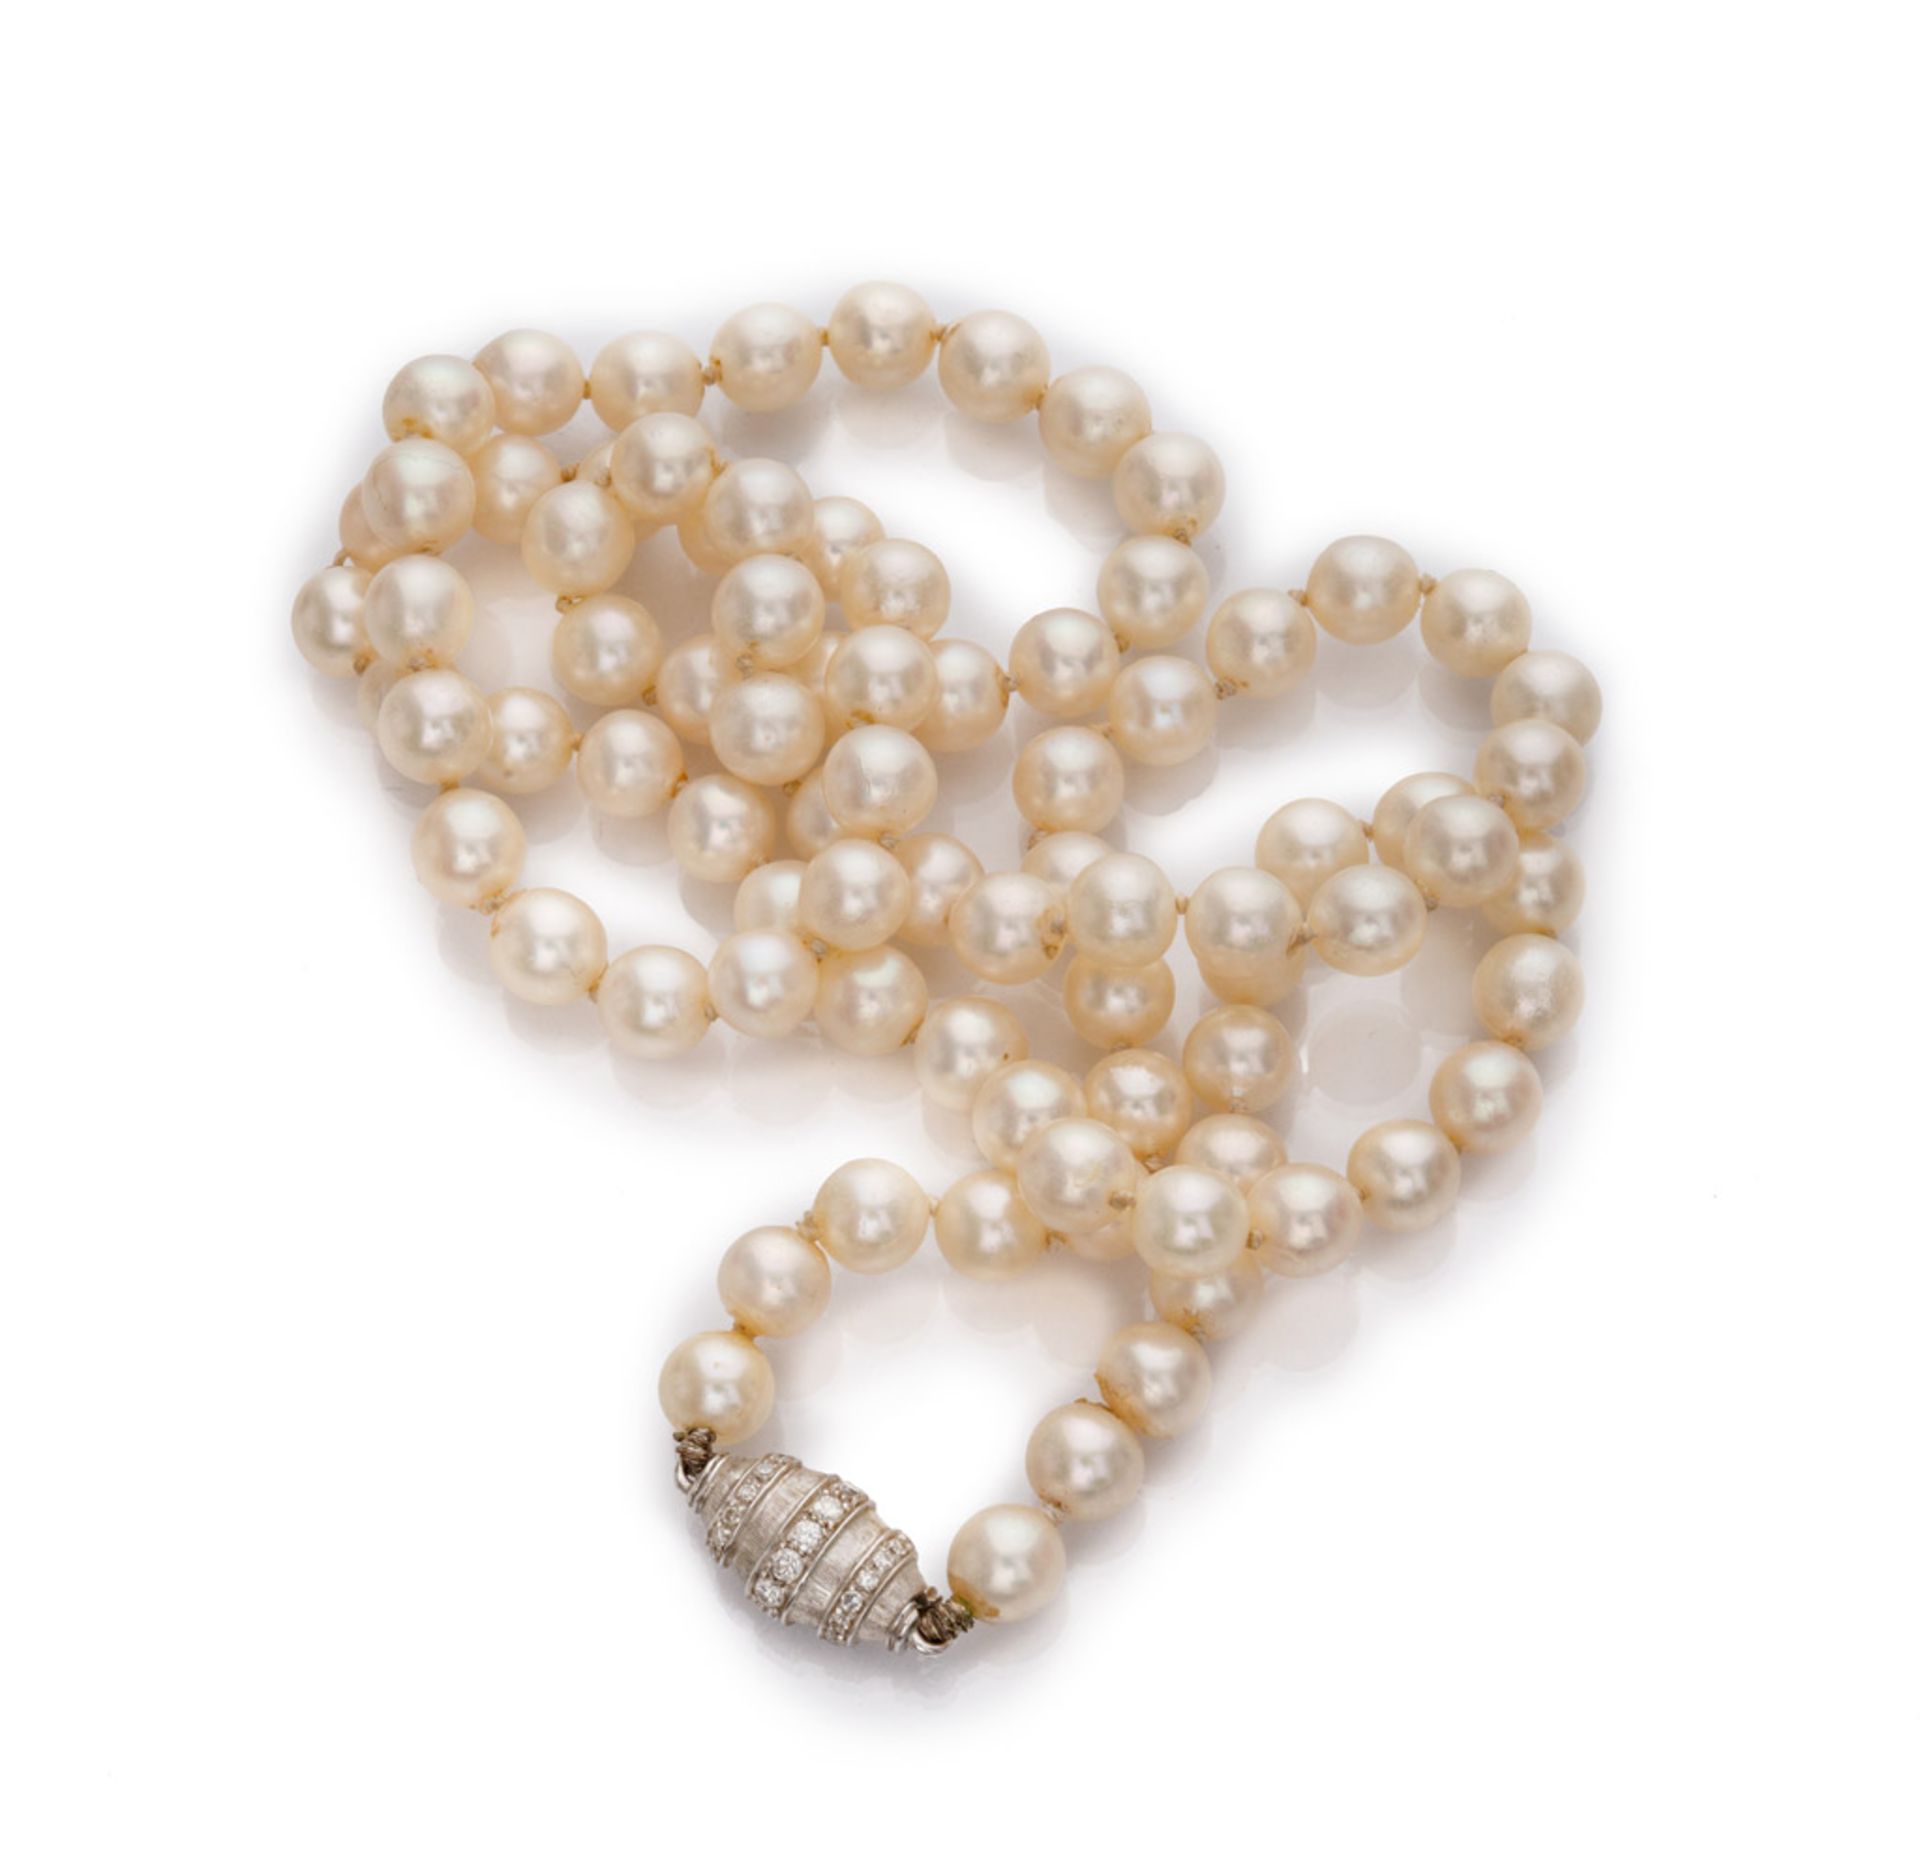 NECKLACE one thread of pearls, with clasp of oval shape in white gold 18 kts., decorated with